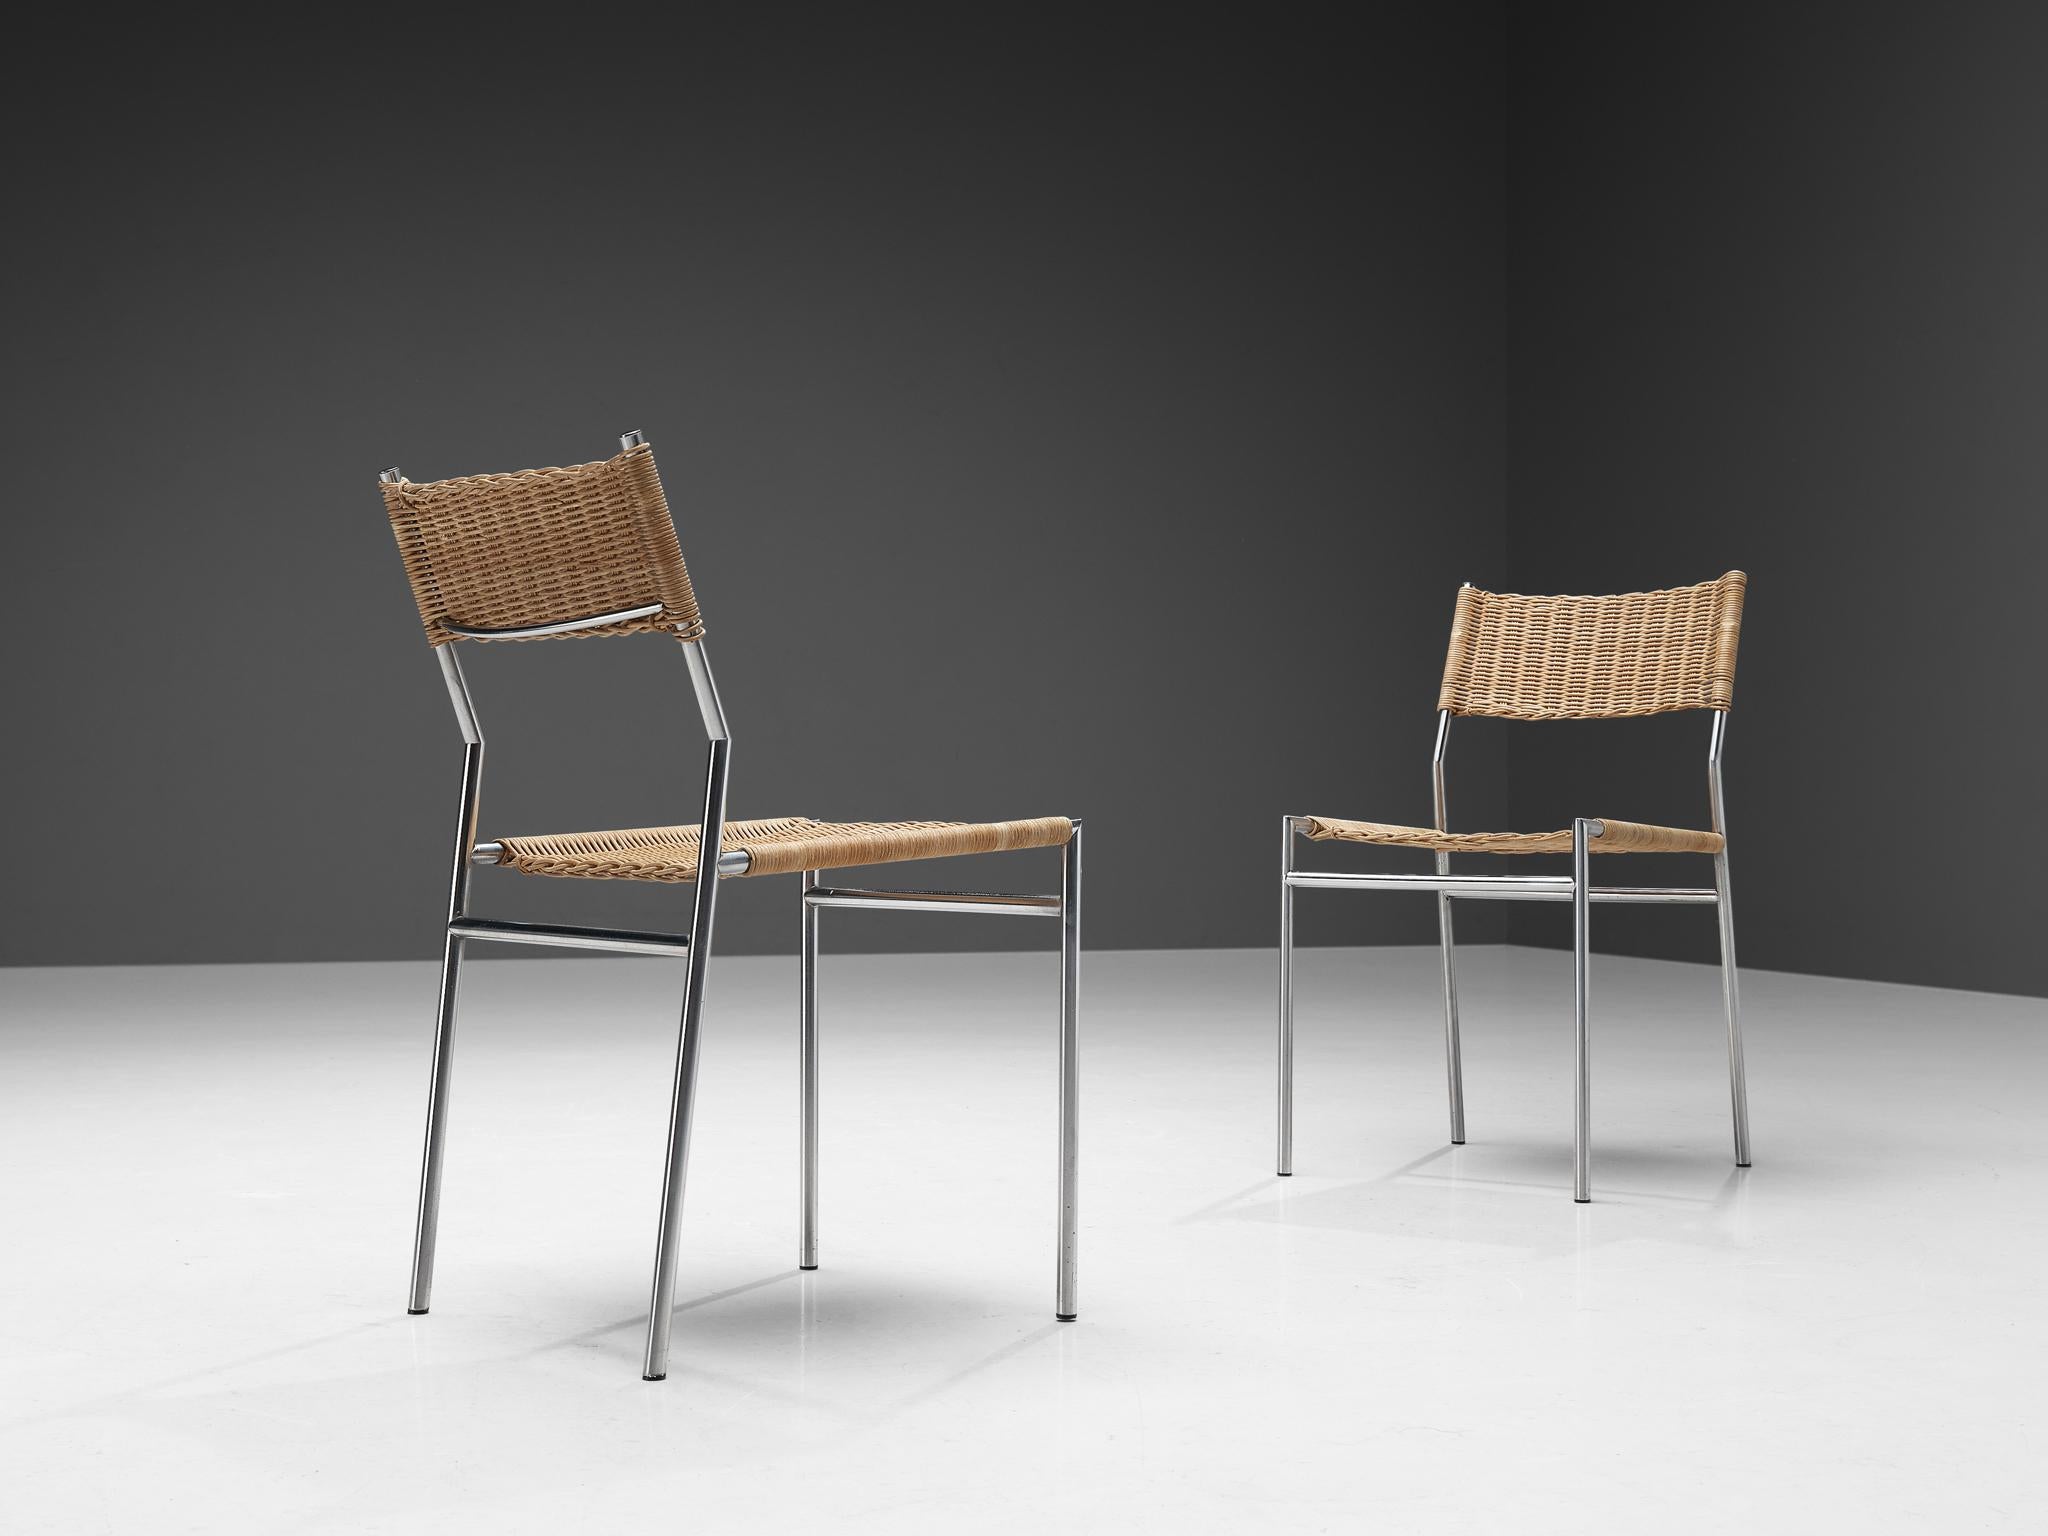 Steel Martin Visser 't Spectrum Dining Room Chairs with Cane